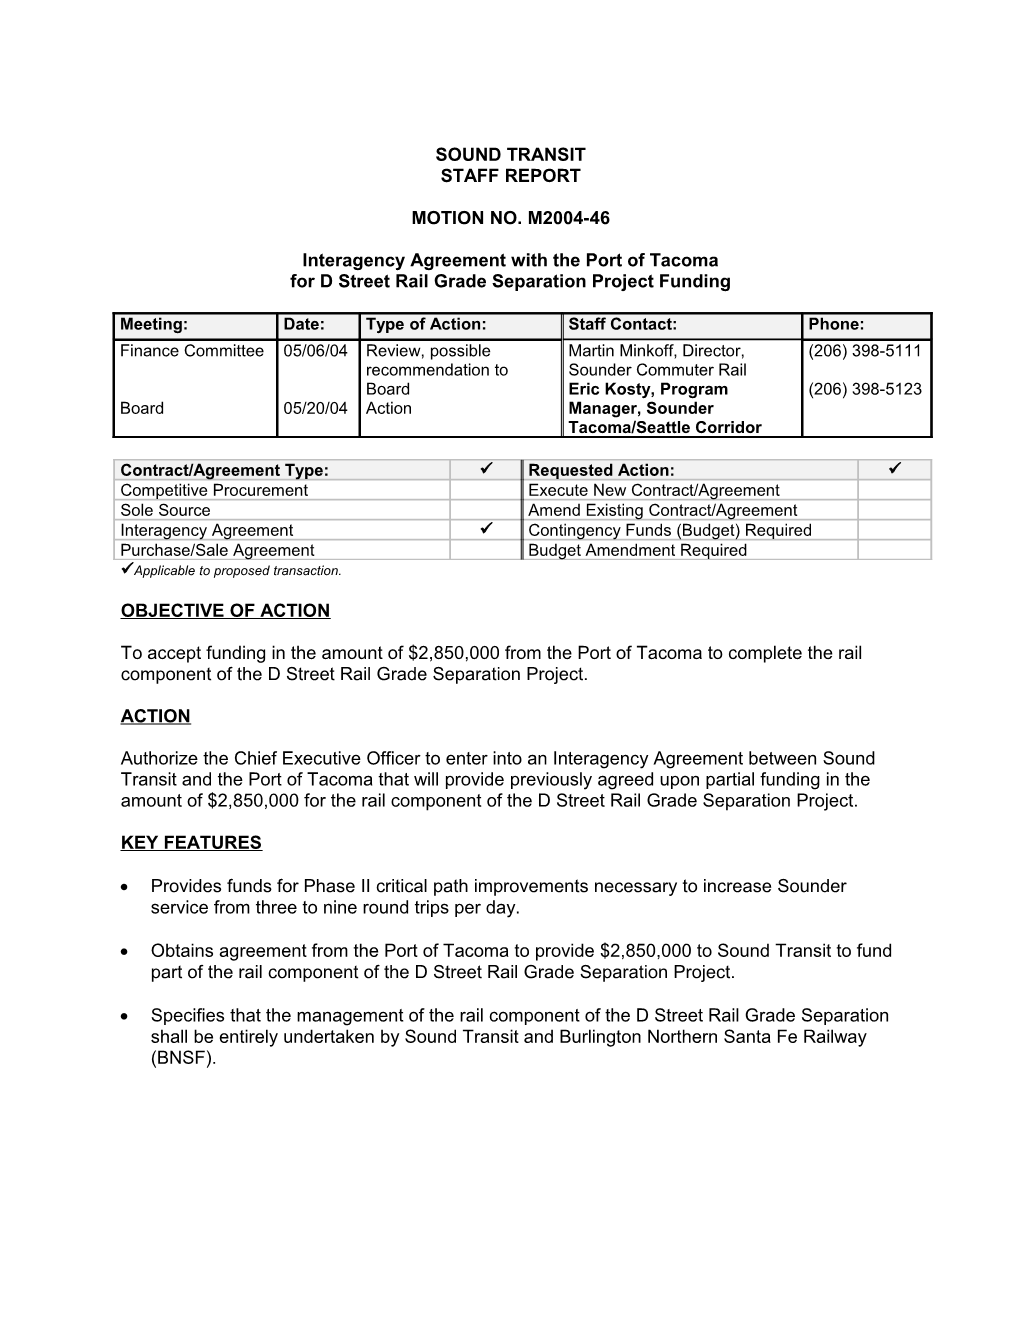 Interagency Agreement with the Port of Tacoma